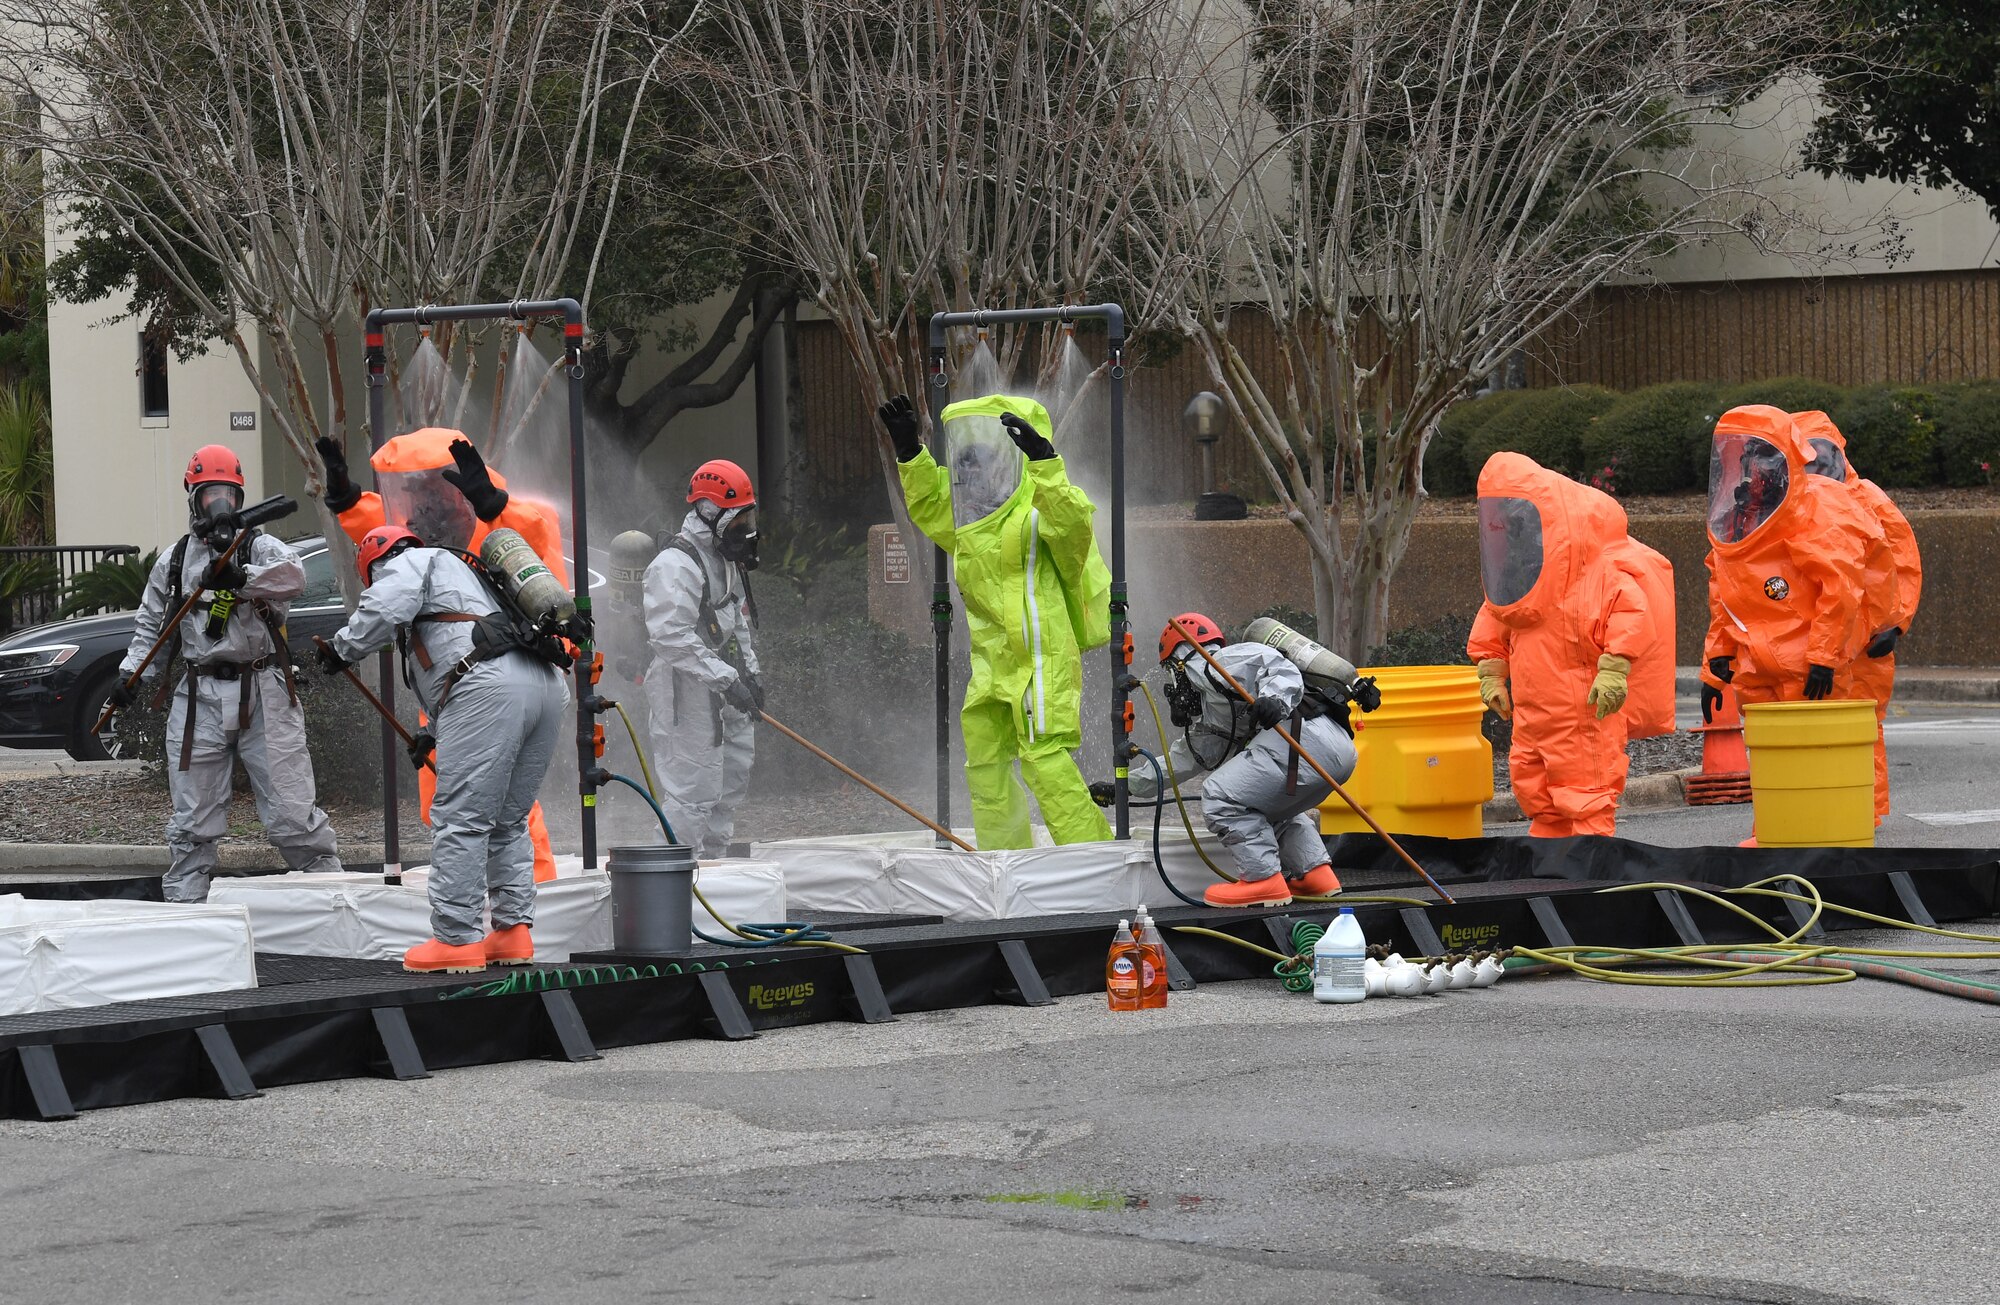 Emergency response team members walk through a decontamination line outside the Keesler Medical Center at Keesler Air Force Base, Mississippi, Feb. 11, 2021. Members of the Keesler Fire Department, 81st Security Forces Squadron, 81st Medical Group and Emergency Management responded to a suspicious package found inside the Keesler Medical Center. (U.S. Air Force photo by Kemberly Groue)